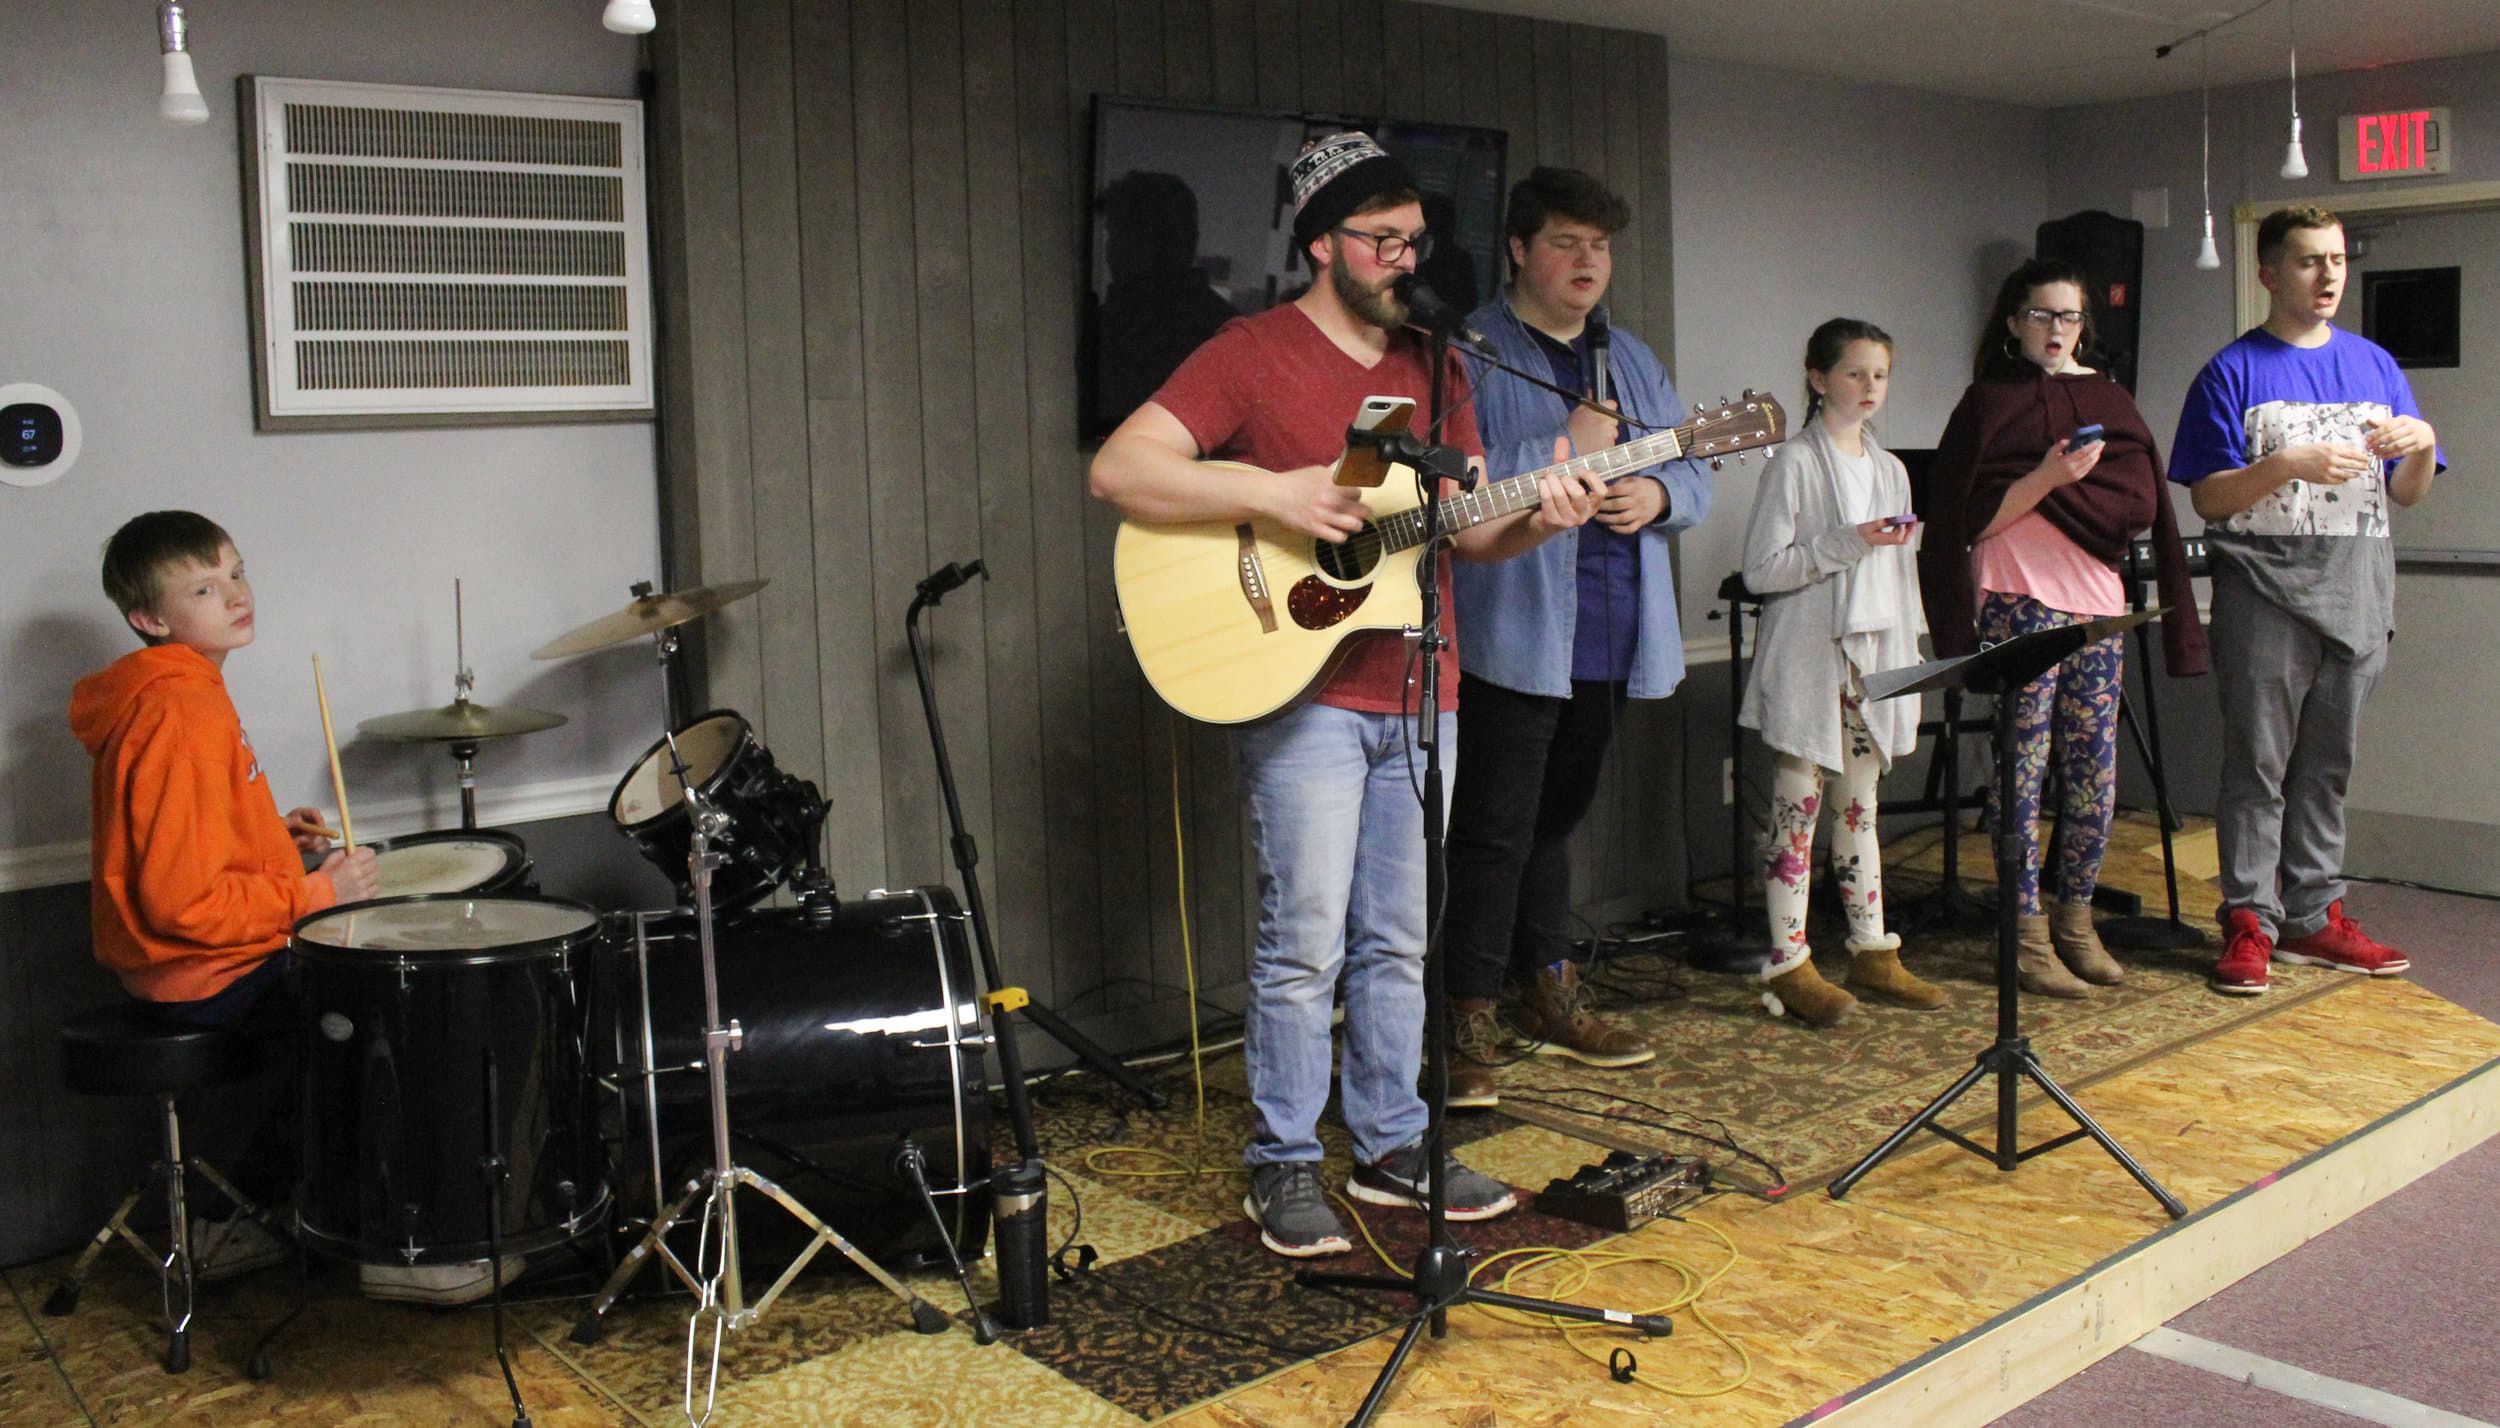 The White Flag Youth Ministry band practices before a Wednesday night of service.